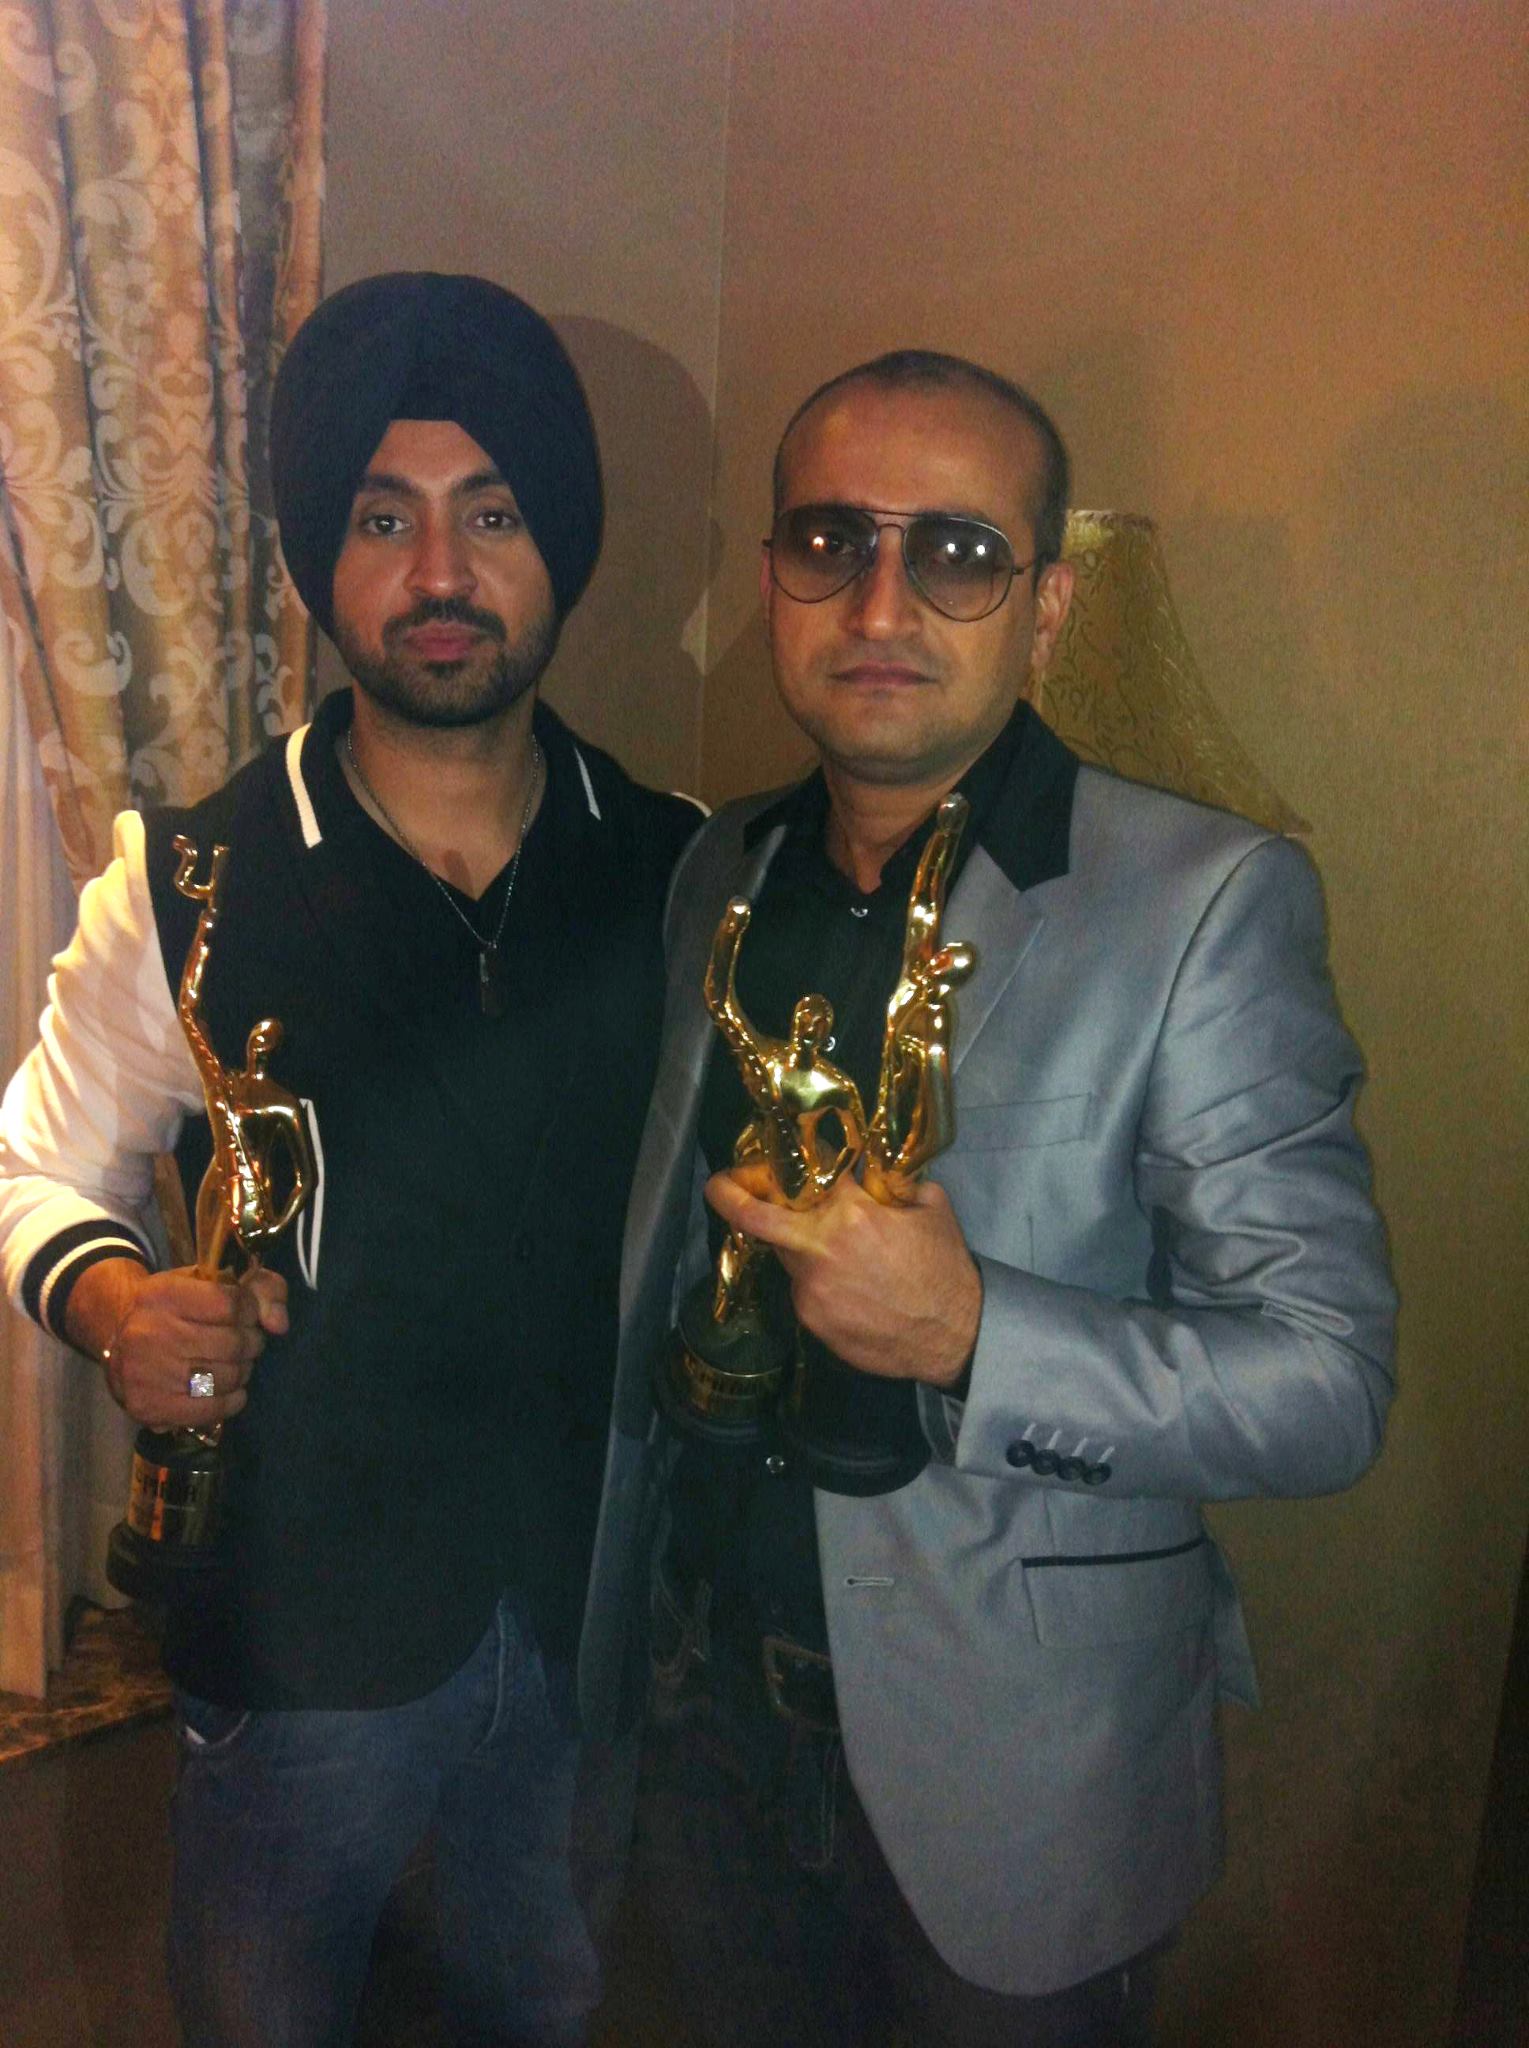 PIFAA award for Best Screenplay with Diljit Dosanjh who got the award for Best Actor